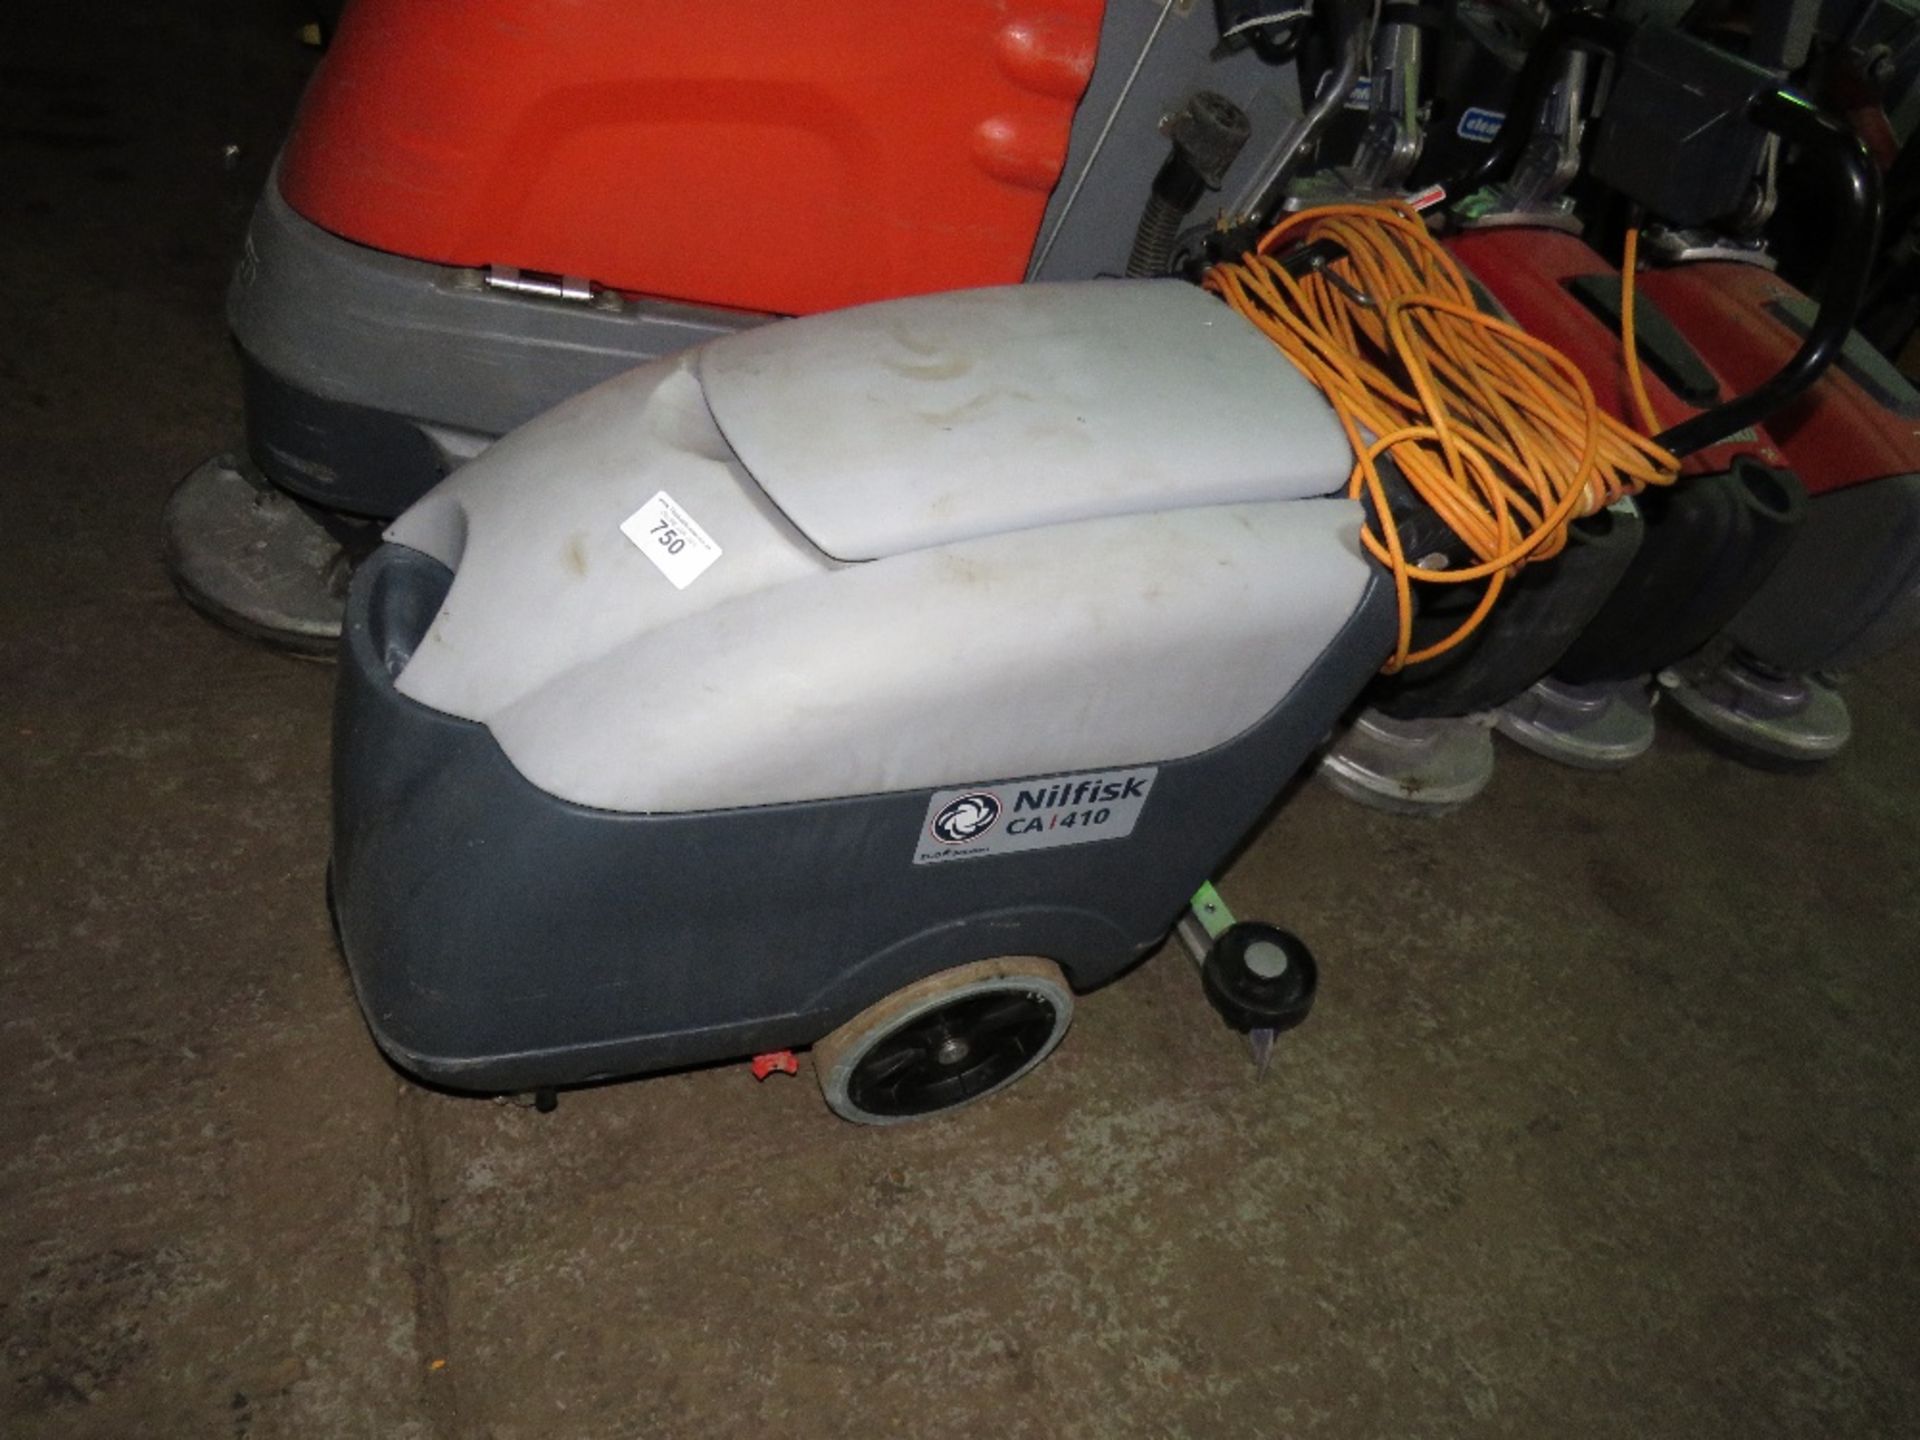 1 X NILFISK CA410 FLOOR CLEANER, NO BATTERIES...CONDITION UNKNOWN This item is being item sold under